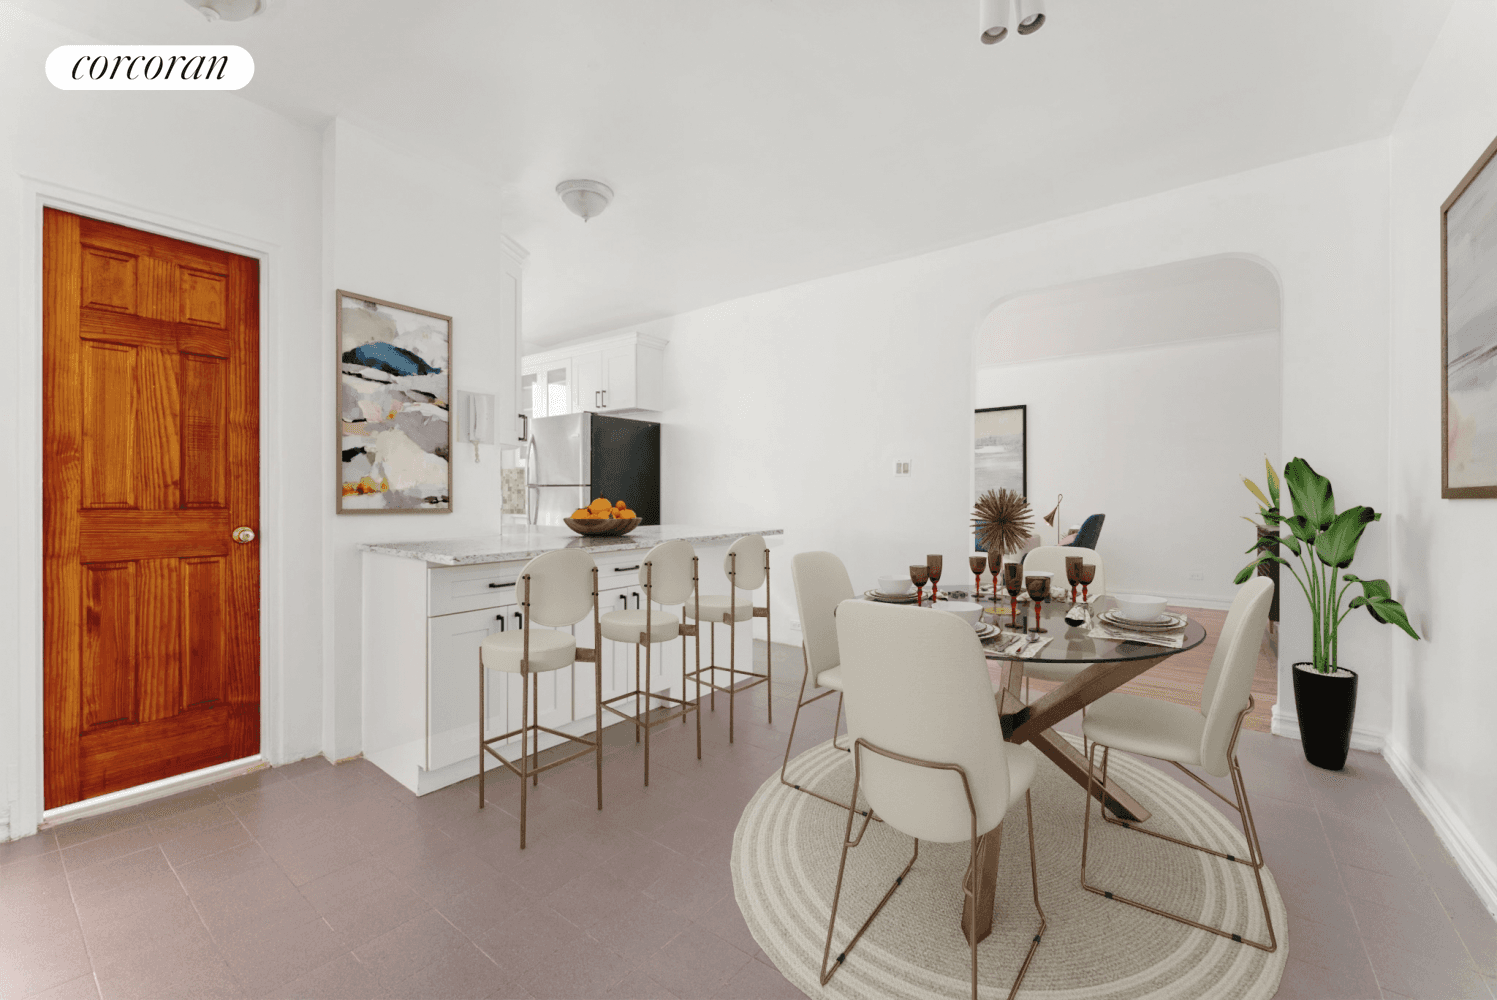 Welcome to 65 36 Wetherole Apartment 603, your gateway to sophisticated living in the heart of Queens' bustling Rego Park !